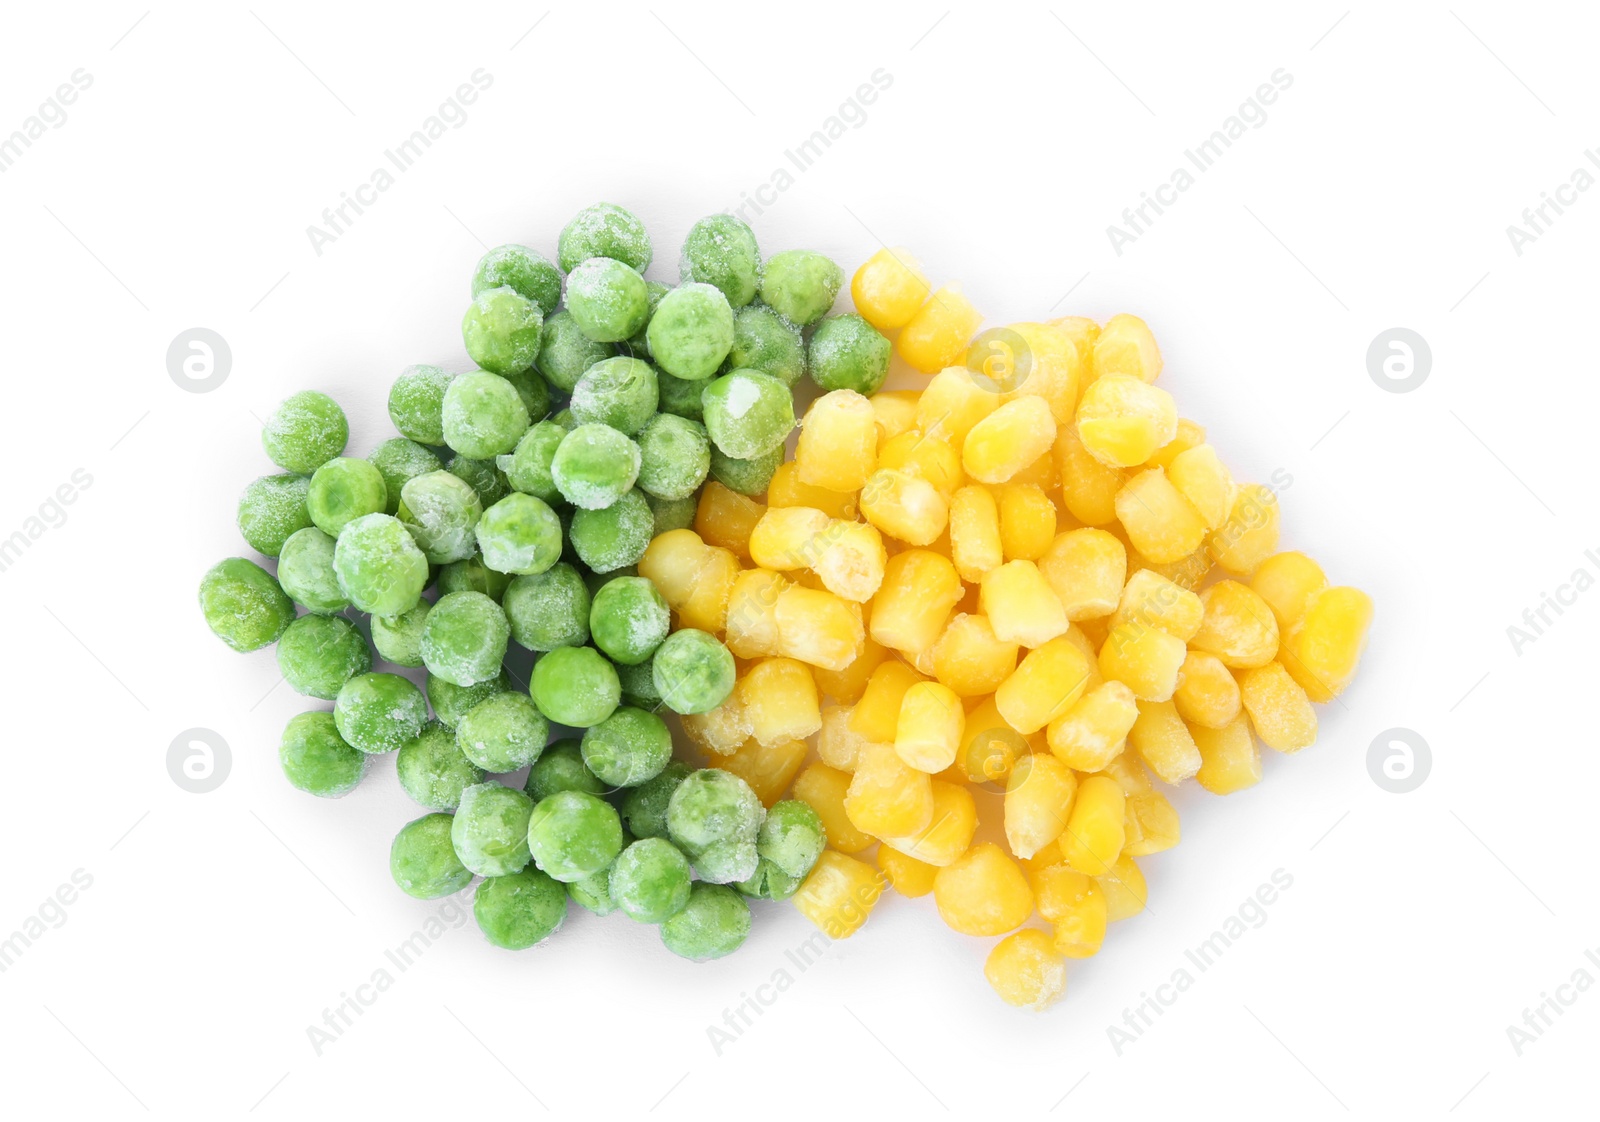 Photo of Mix of frozen vegetables on white background, top view